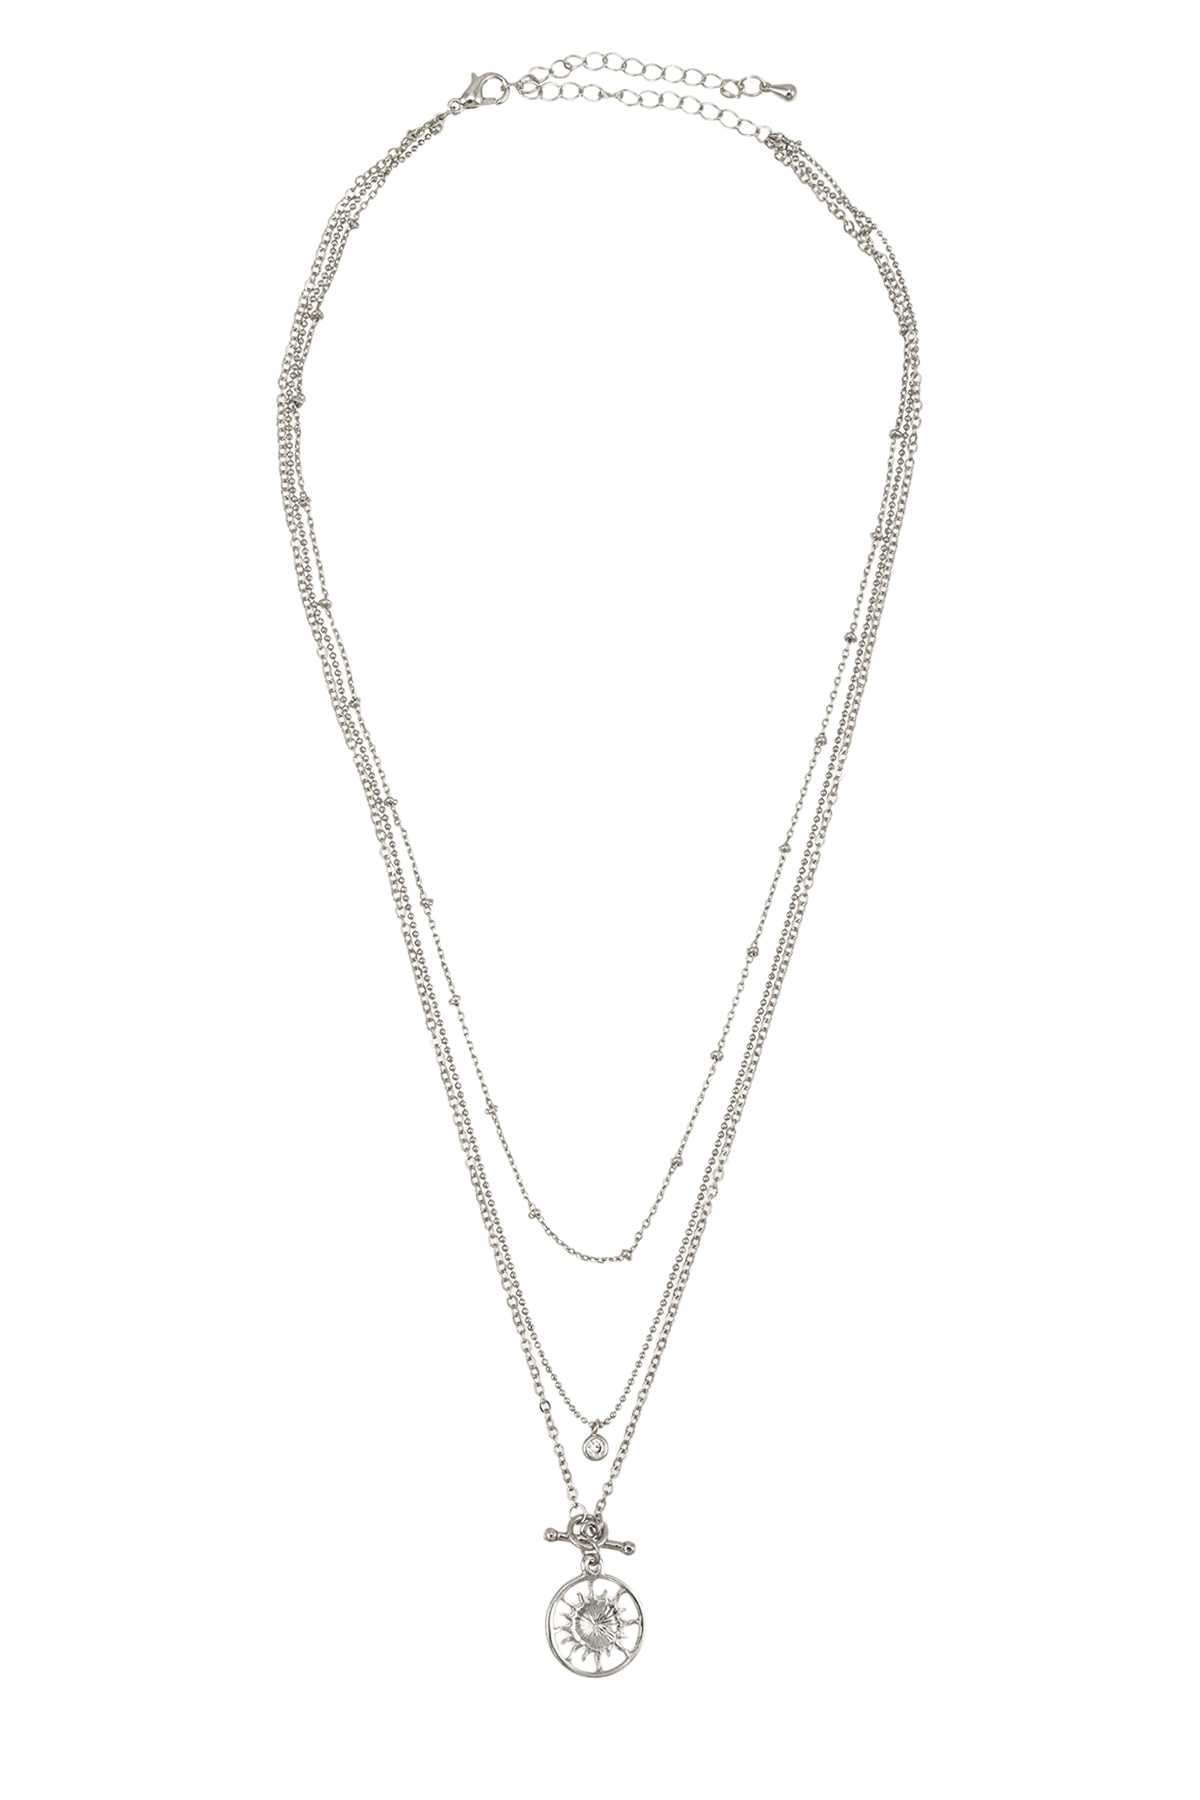 3 Layered Chain Necklace with Textured Disc Charm